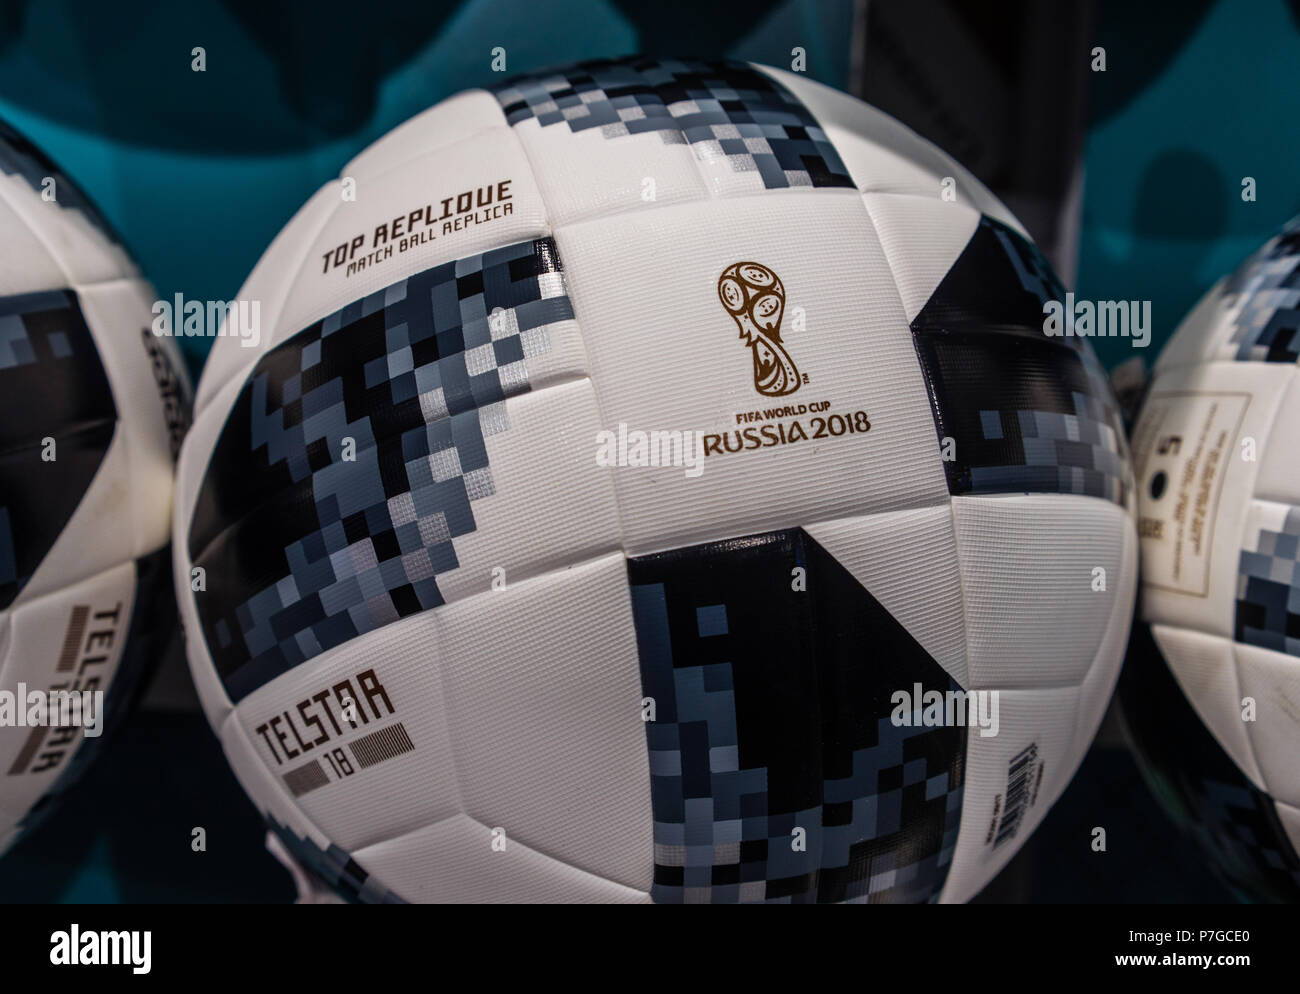 2 July 2018 Moscow, Russia The official ball for the FIFA World Cup 2018 Adidas  Telstar 18 Stock Photo - Alamy